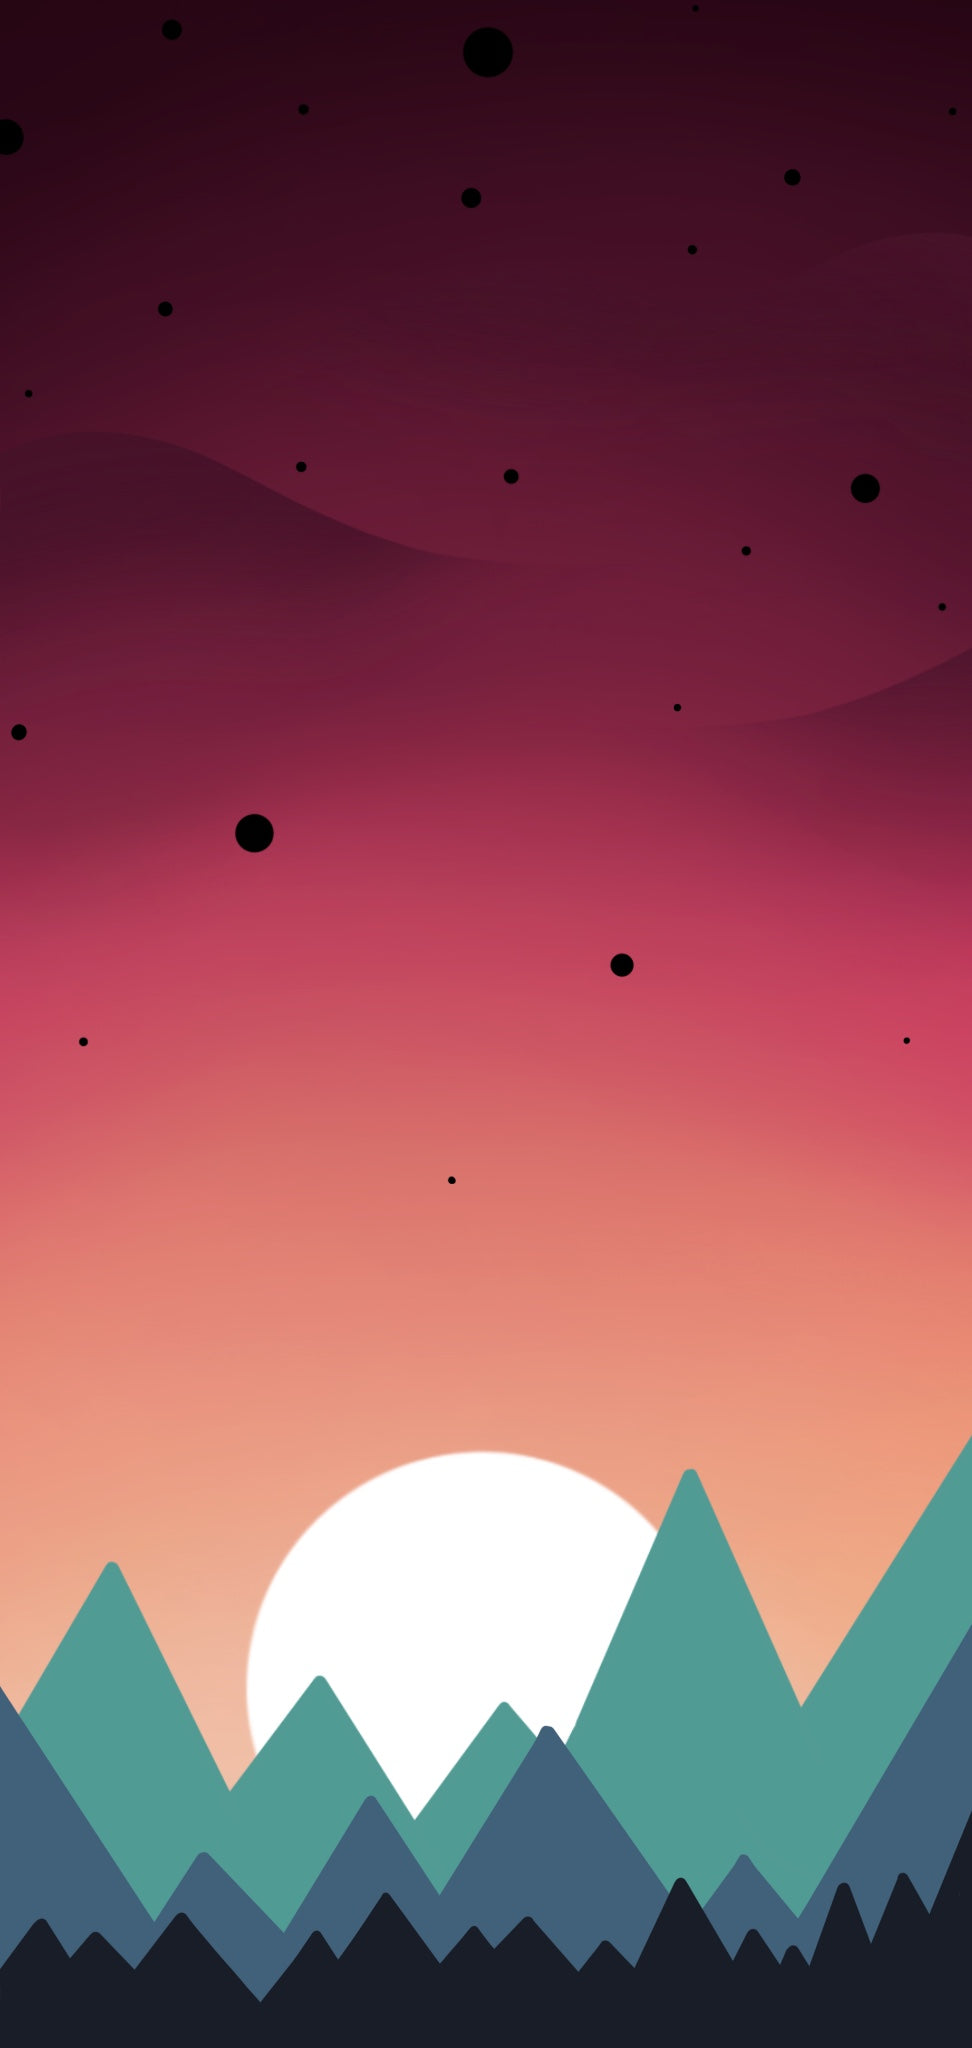 Samsung & iPhone Wallpaper Pack - FREE